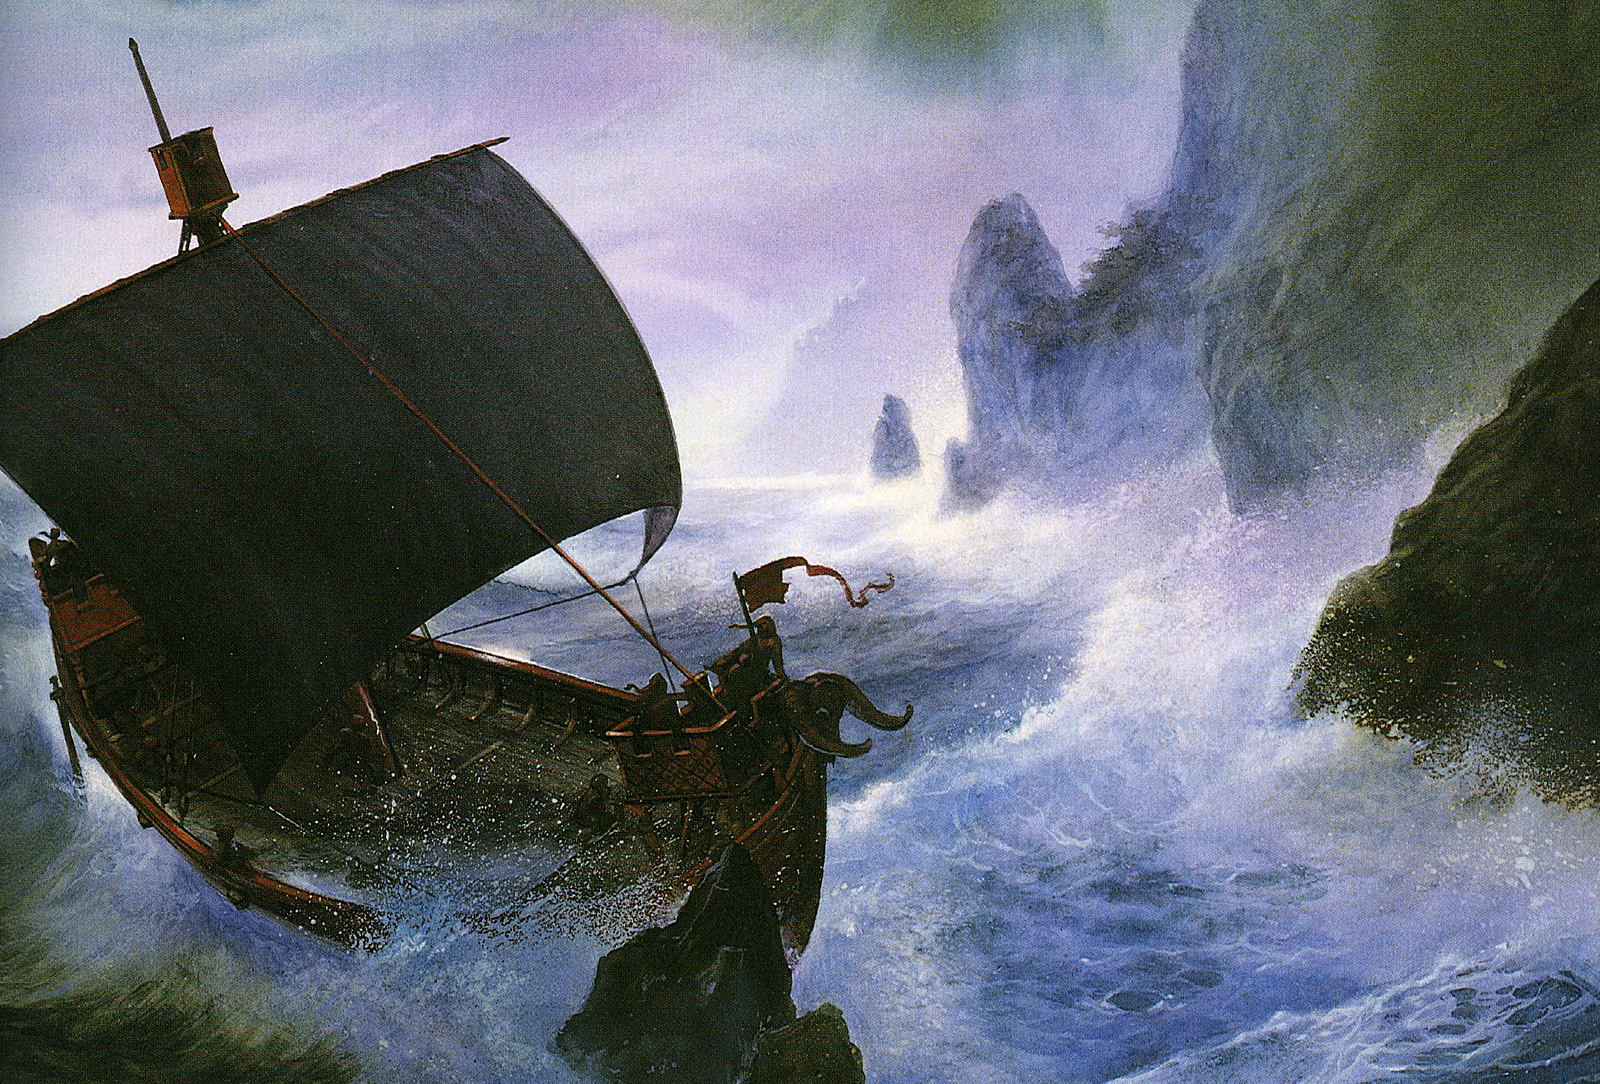 10 Authors Who Wrote Gritty, Realistic Fantasy Before George R.R. Martin